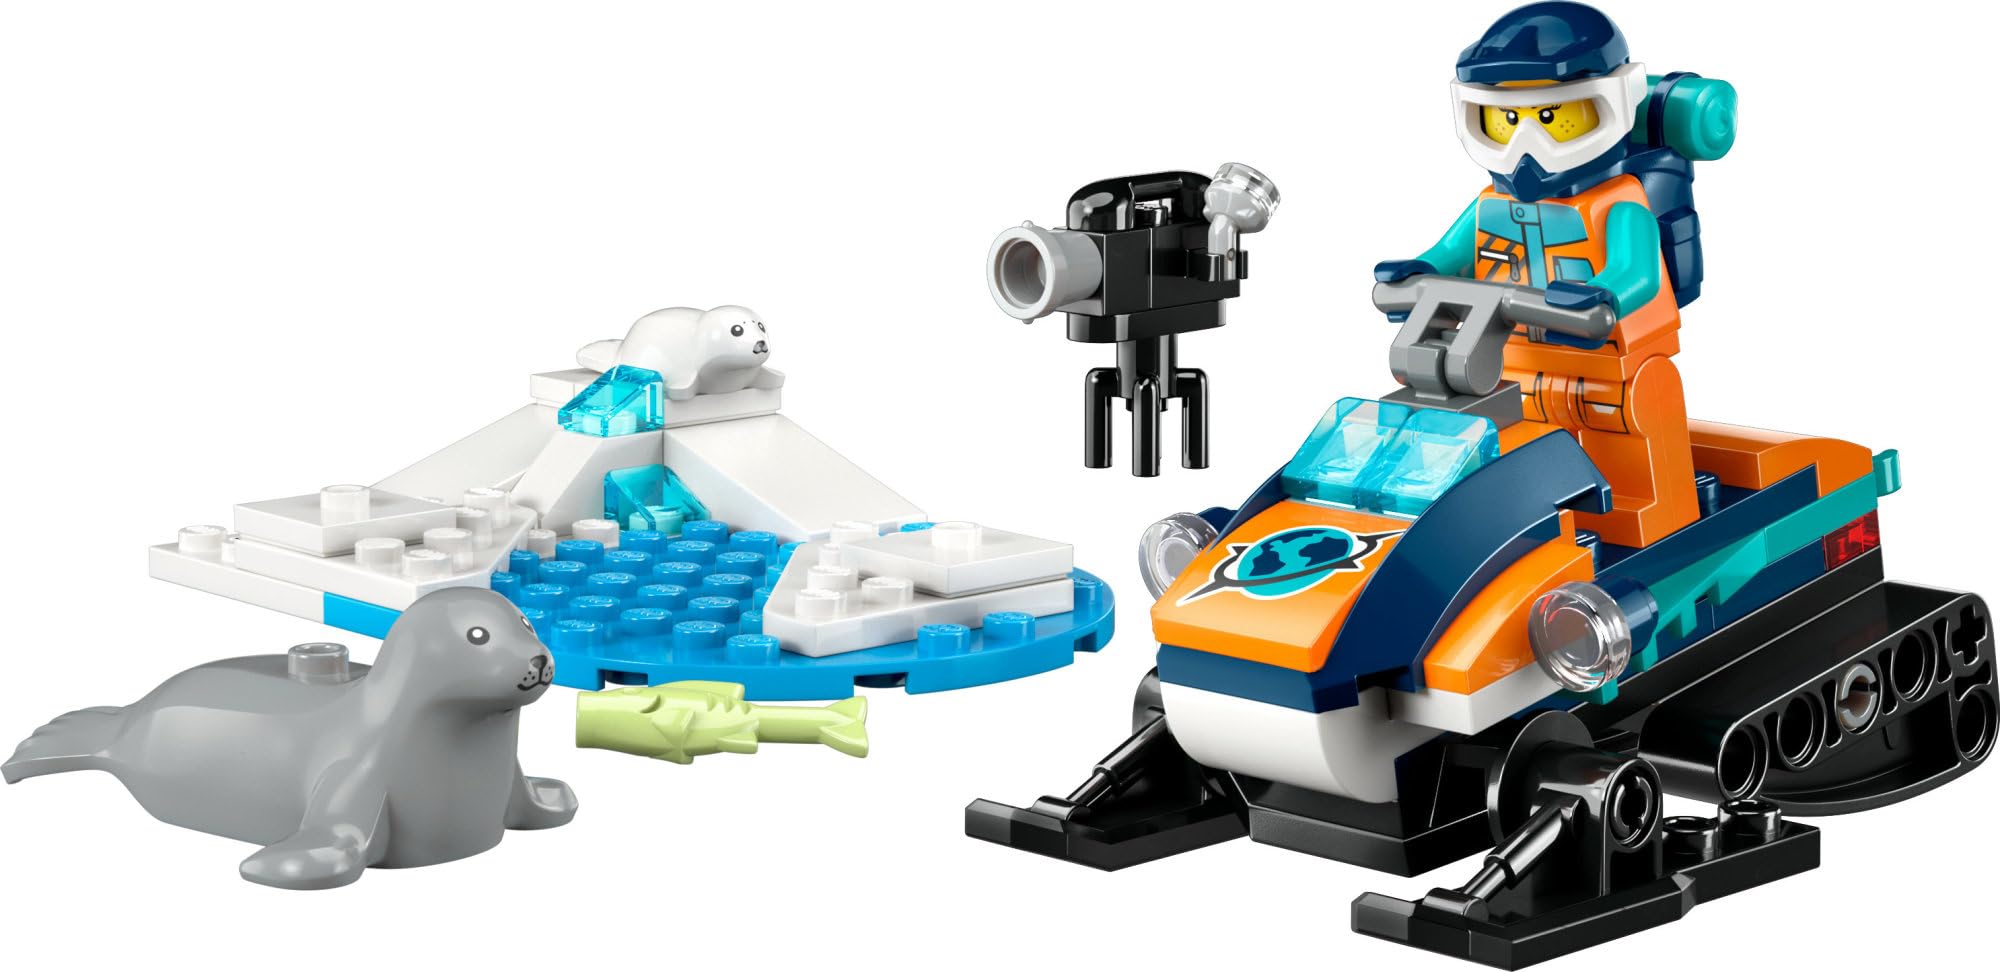 LEGO City Arctic Explorer Snowmobile 60376 Building Toy Set, Snowmobile Playset with Minifigures and 2 Seal Figures for Imaginative Role Play, Fun Gift Idea for 5 Year olds